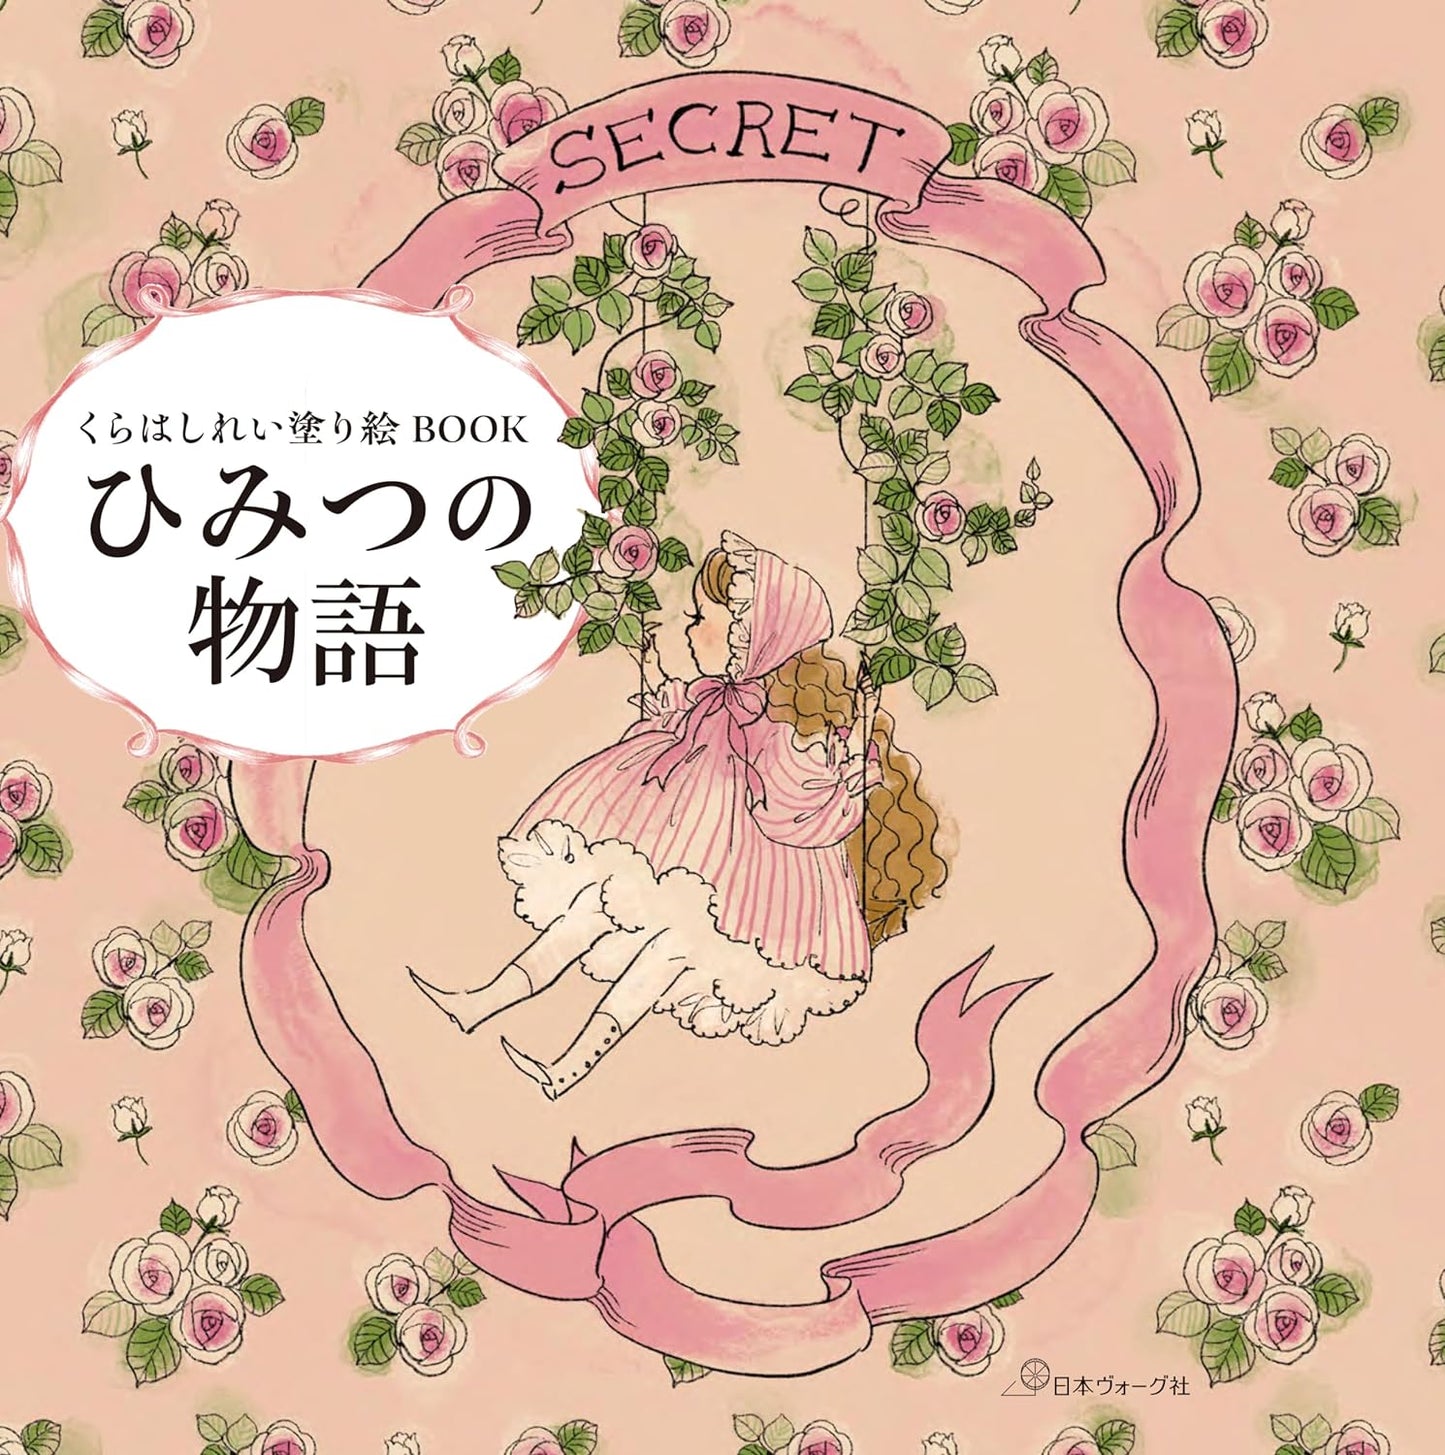 [Pre-order] SECRET STORY Coloring Book (Japanese) by Shirei Kurahashi